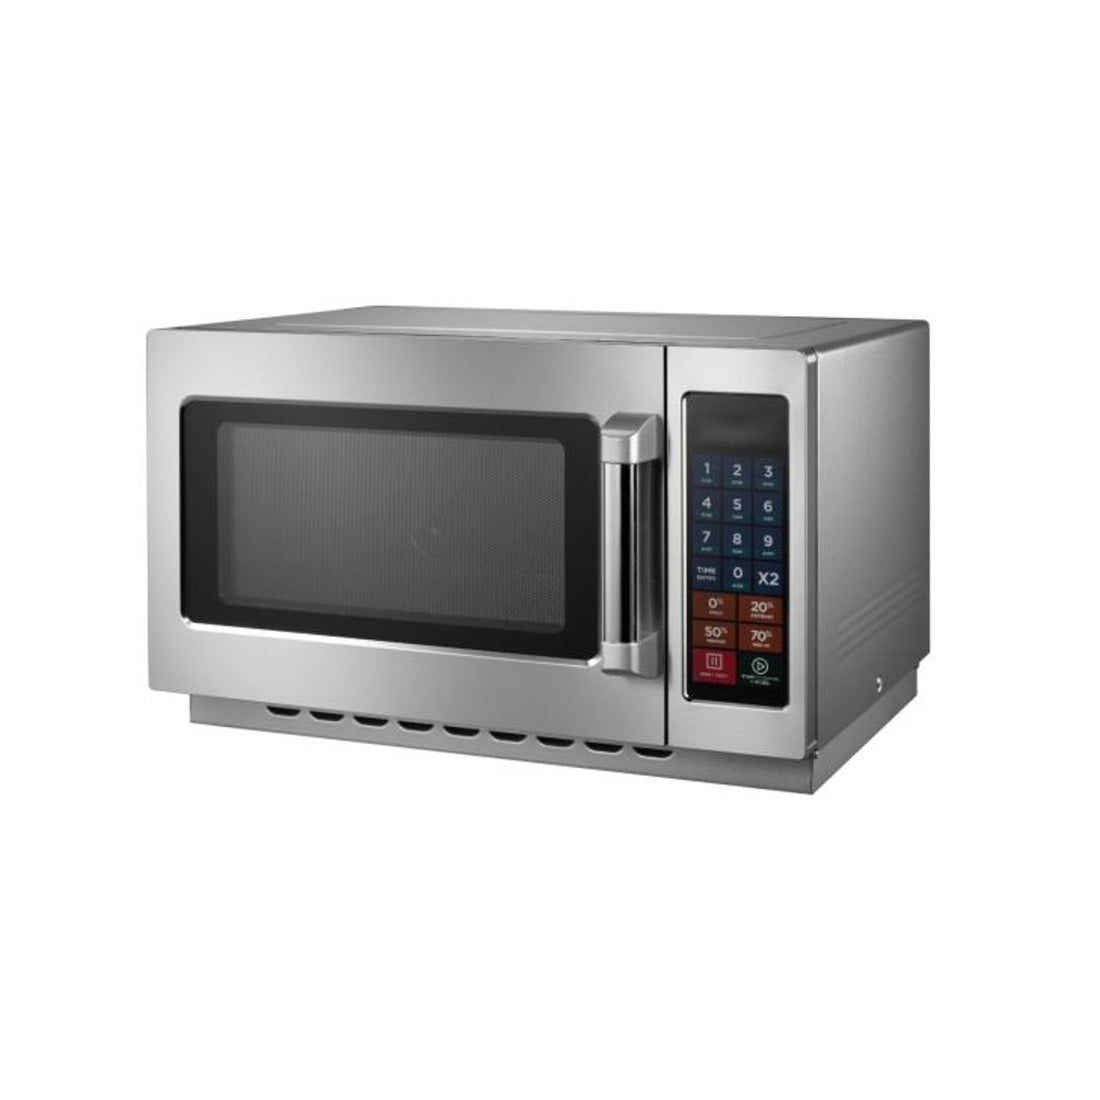 F.E.D Stainless Steel Microwave Oven MD-1400 Commercial Microwave Ovens